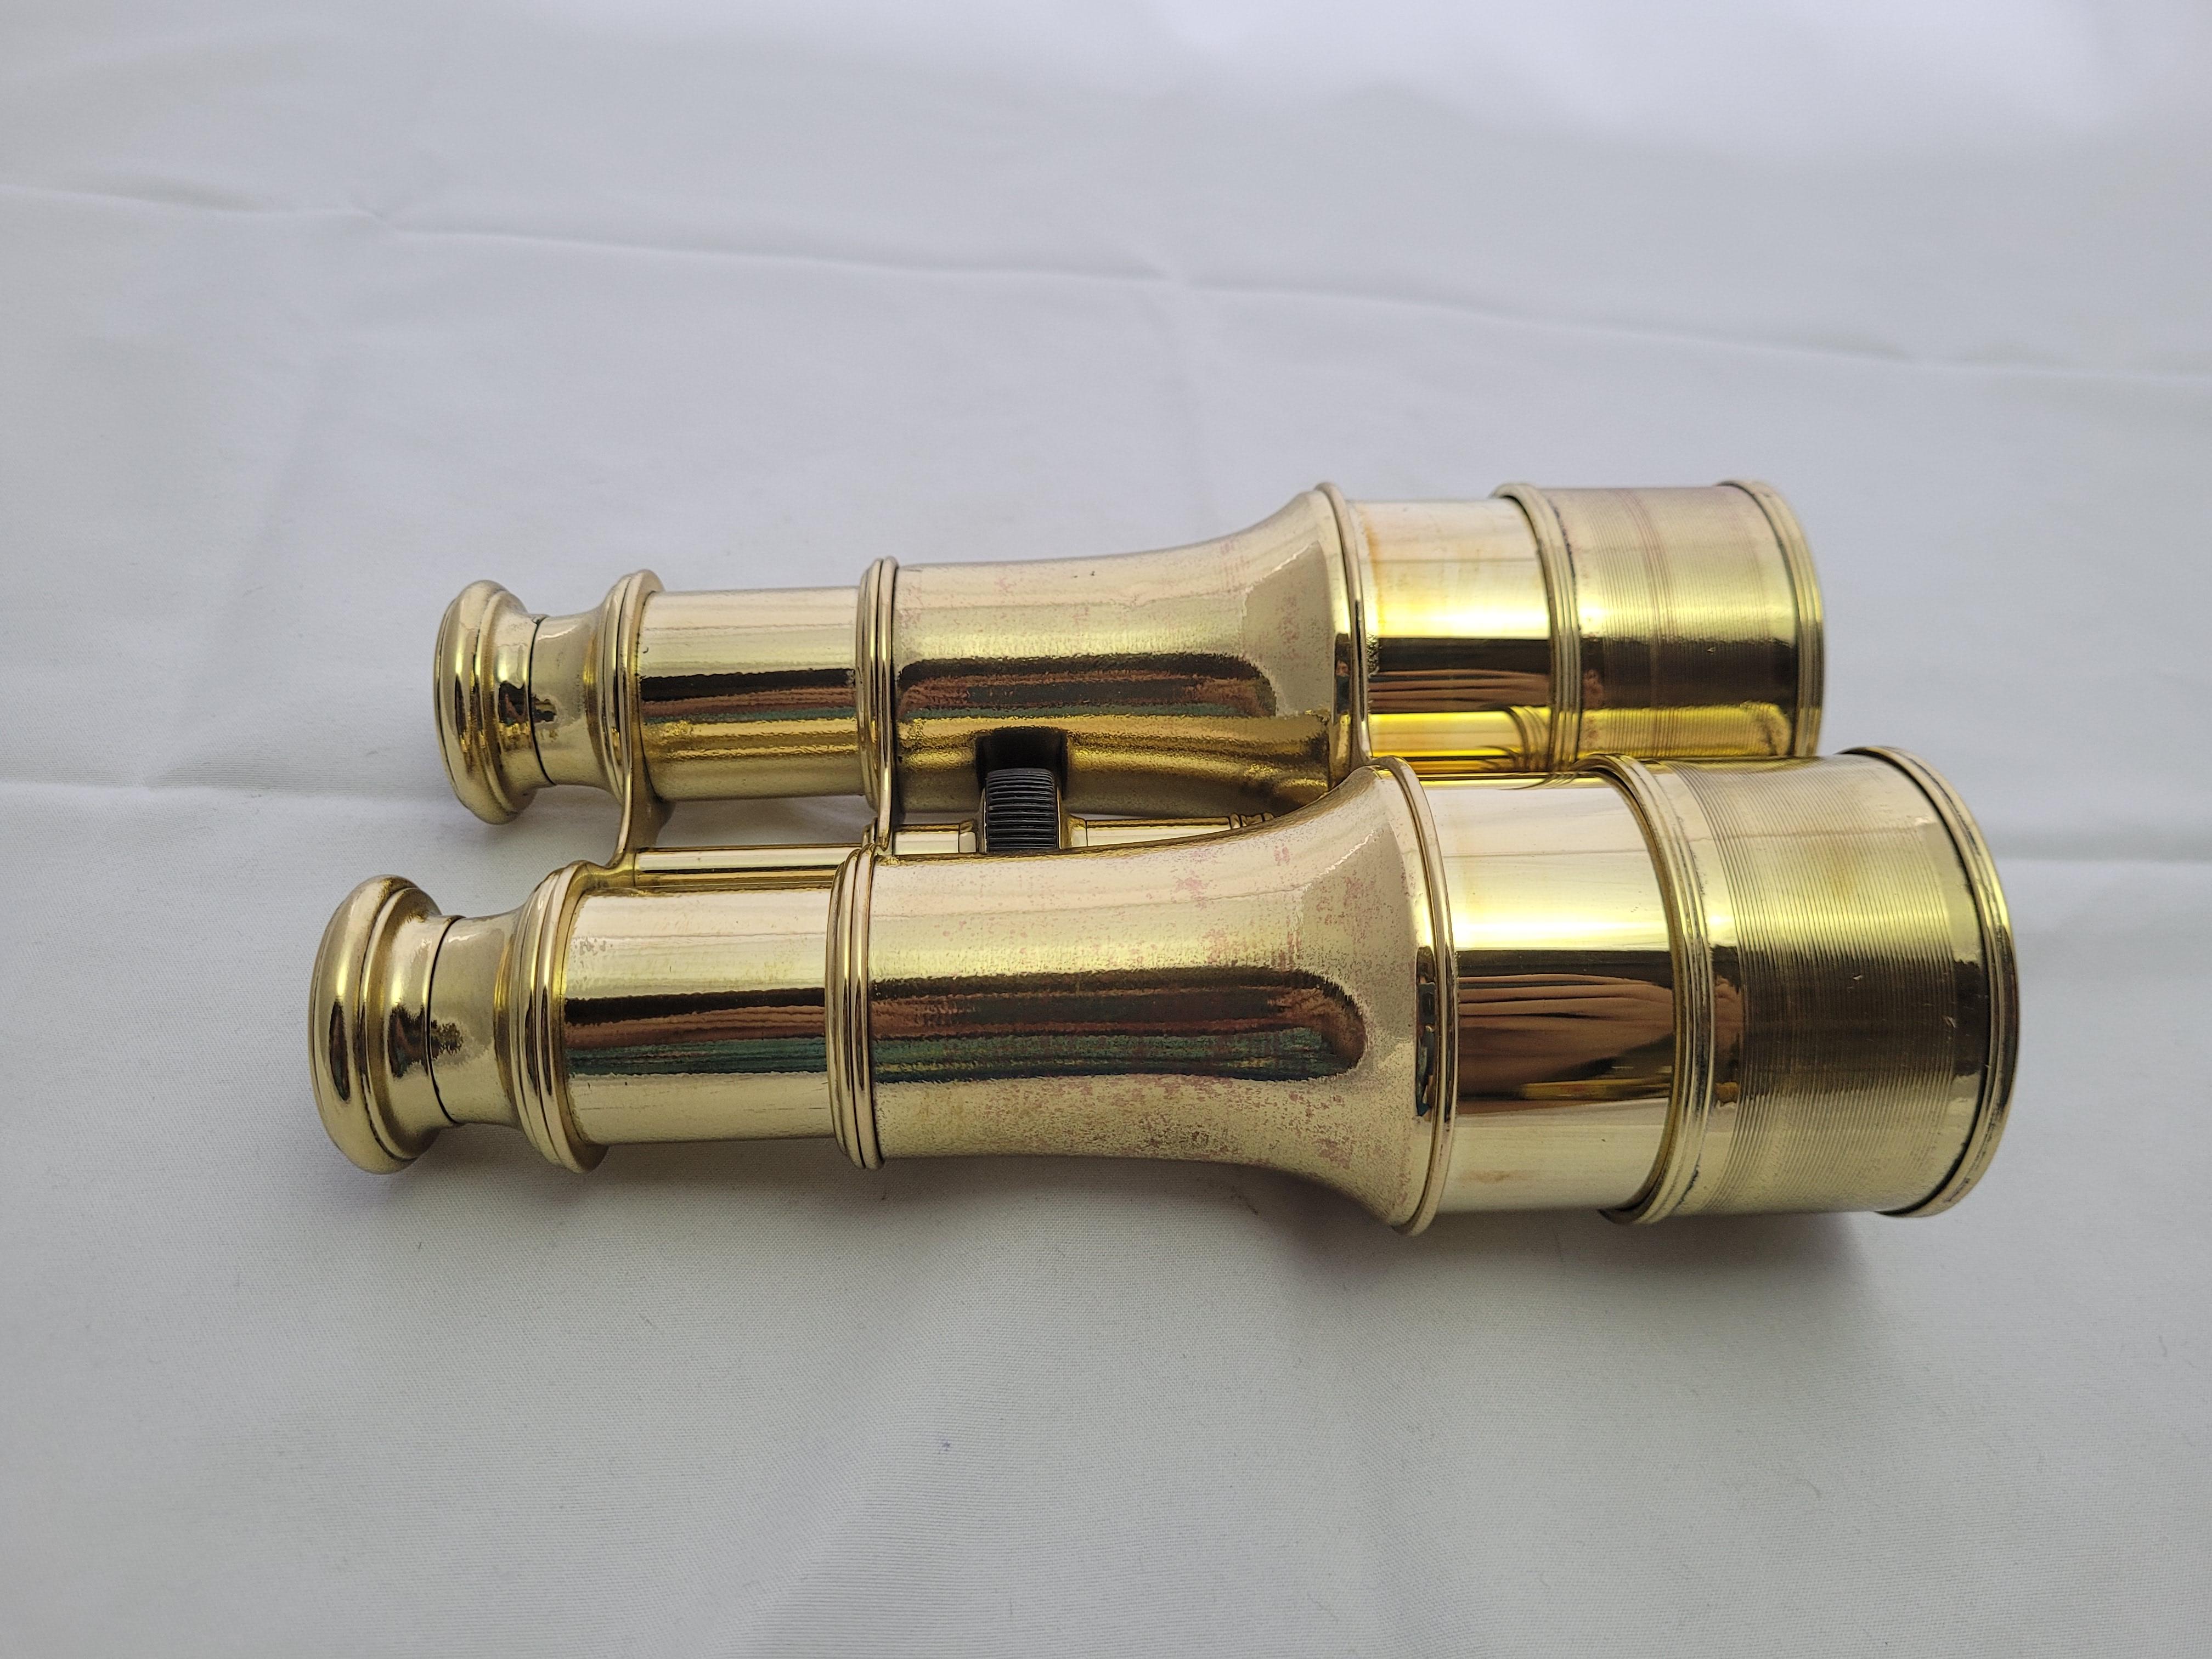 French Yachting Binoculars by Lemaire Fabt. Paris 2